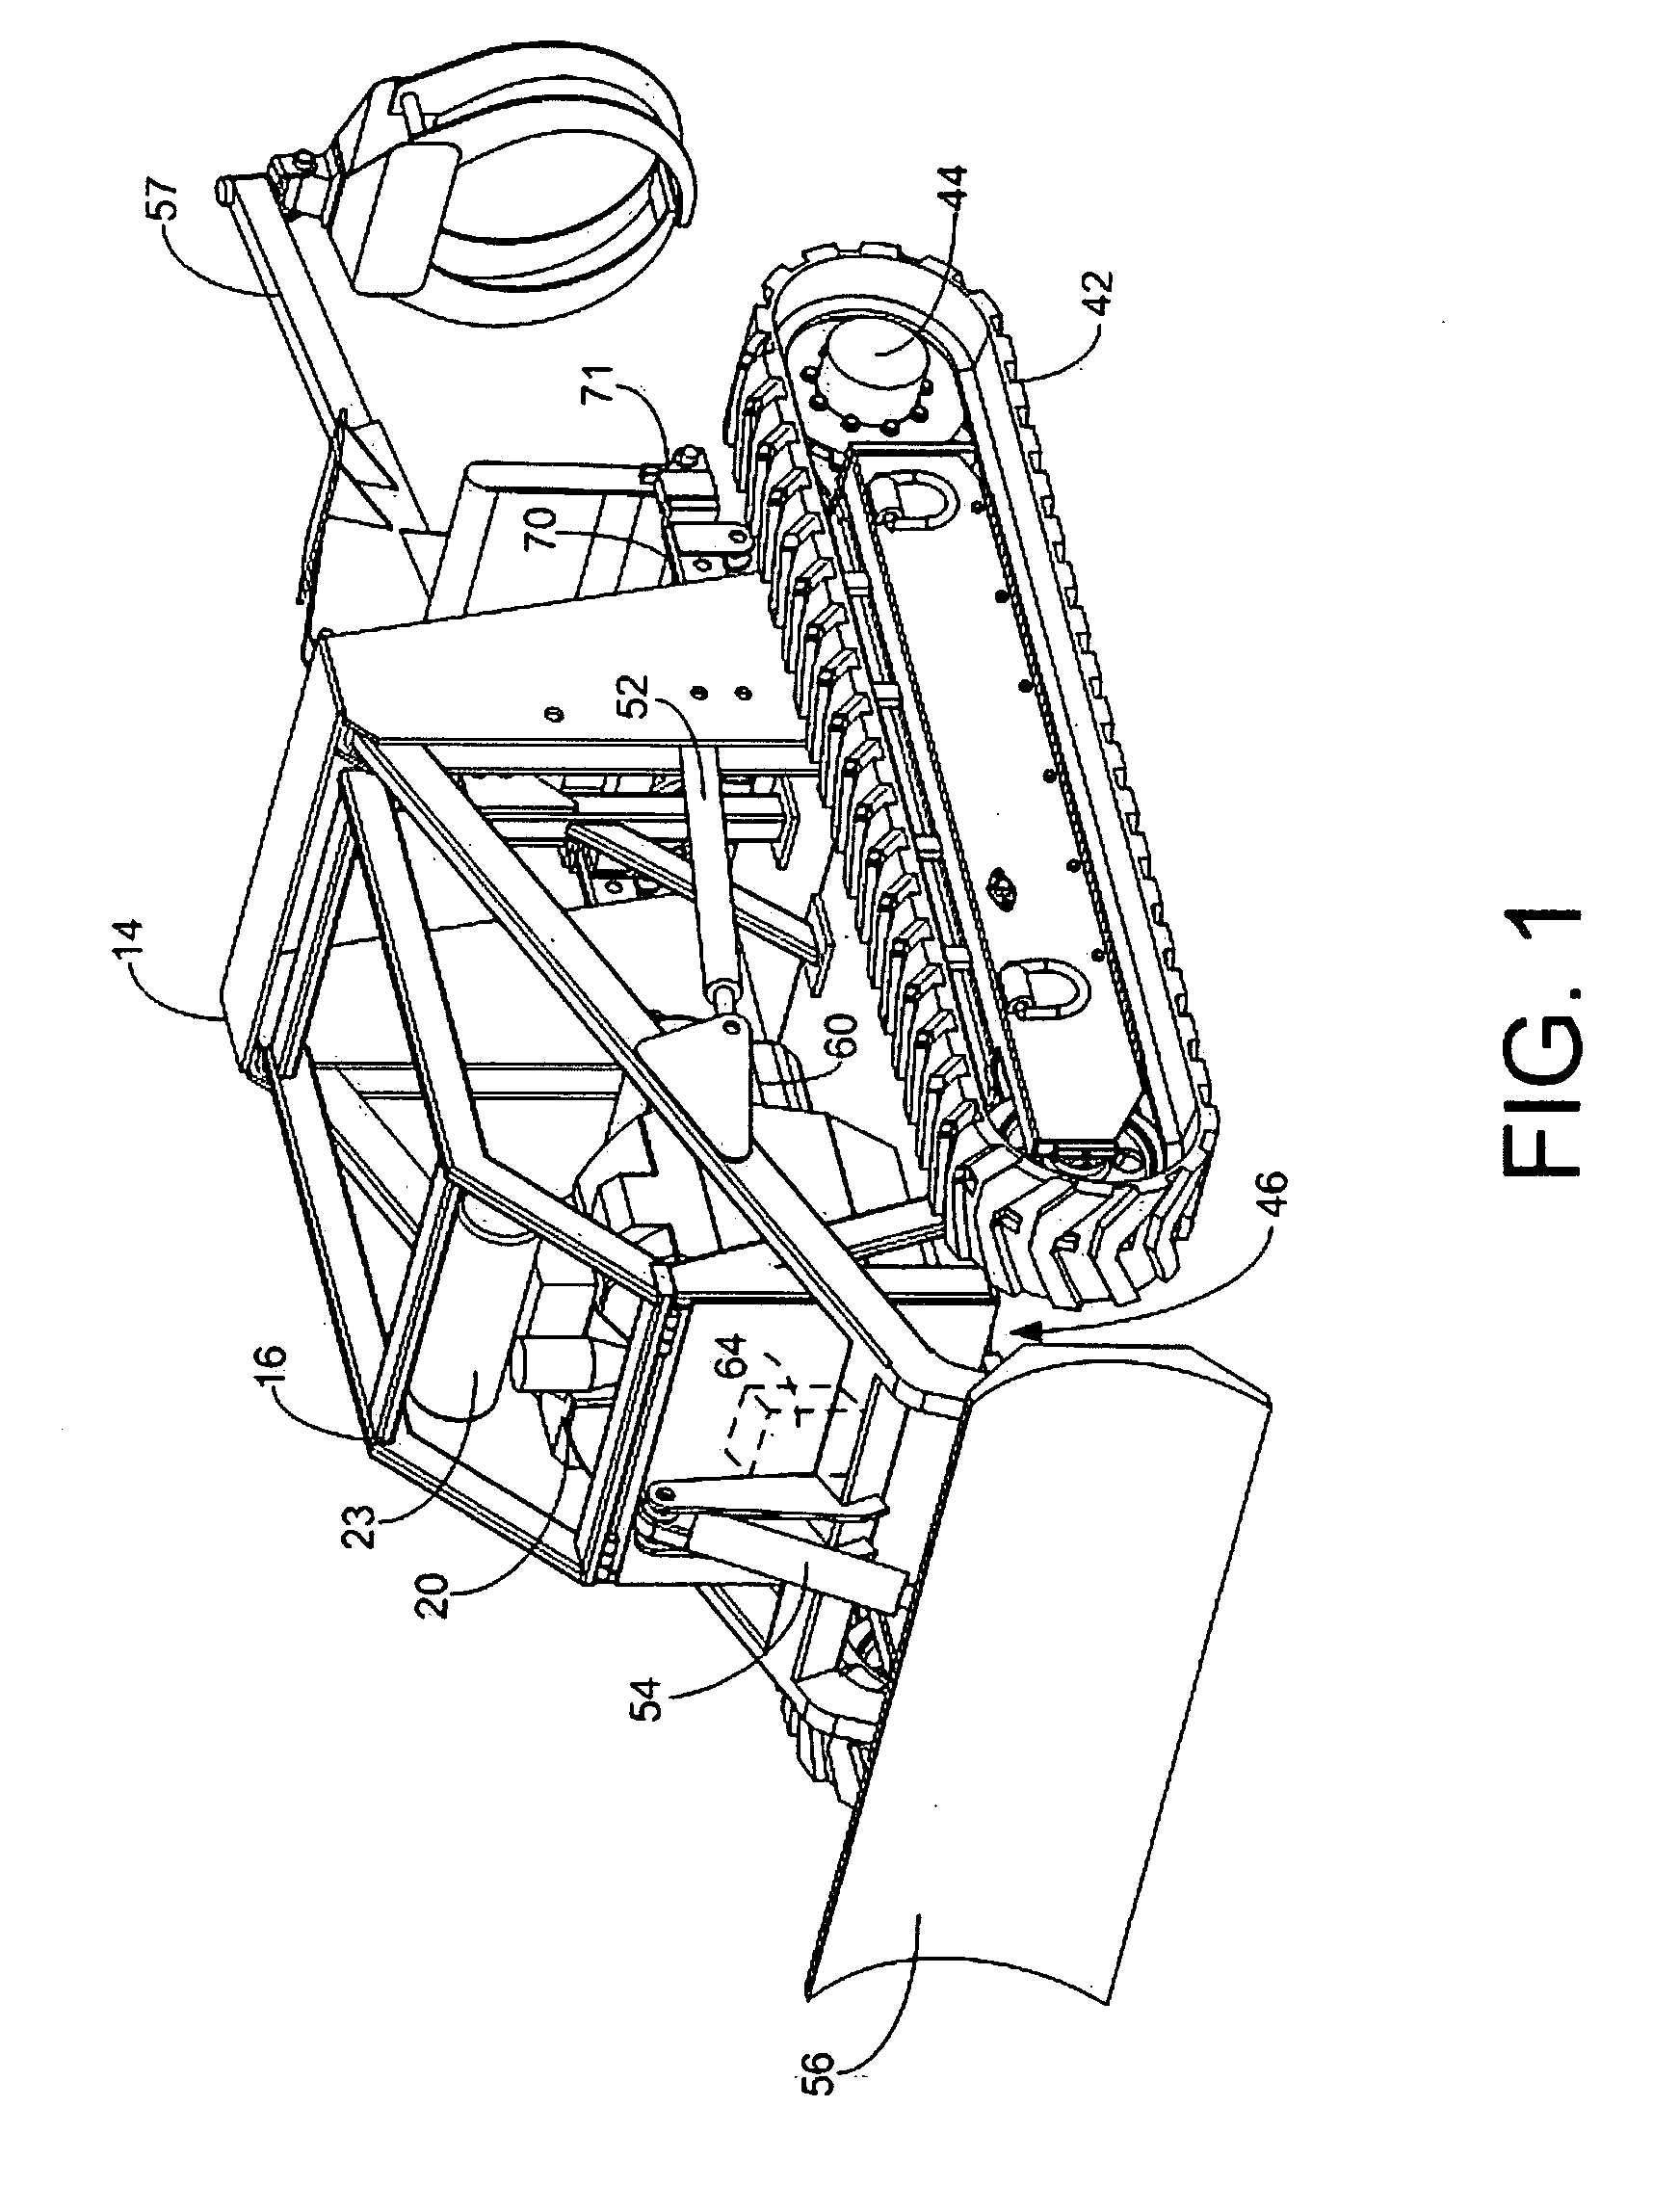 Unmanned land vehicle having universal interfaces for attachments and autonomous operation capabilities and method of operation thereof